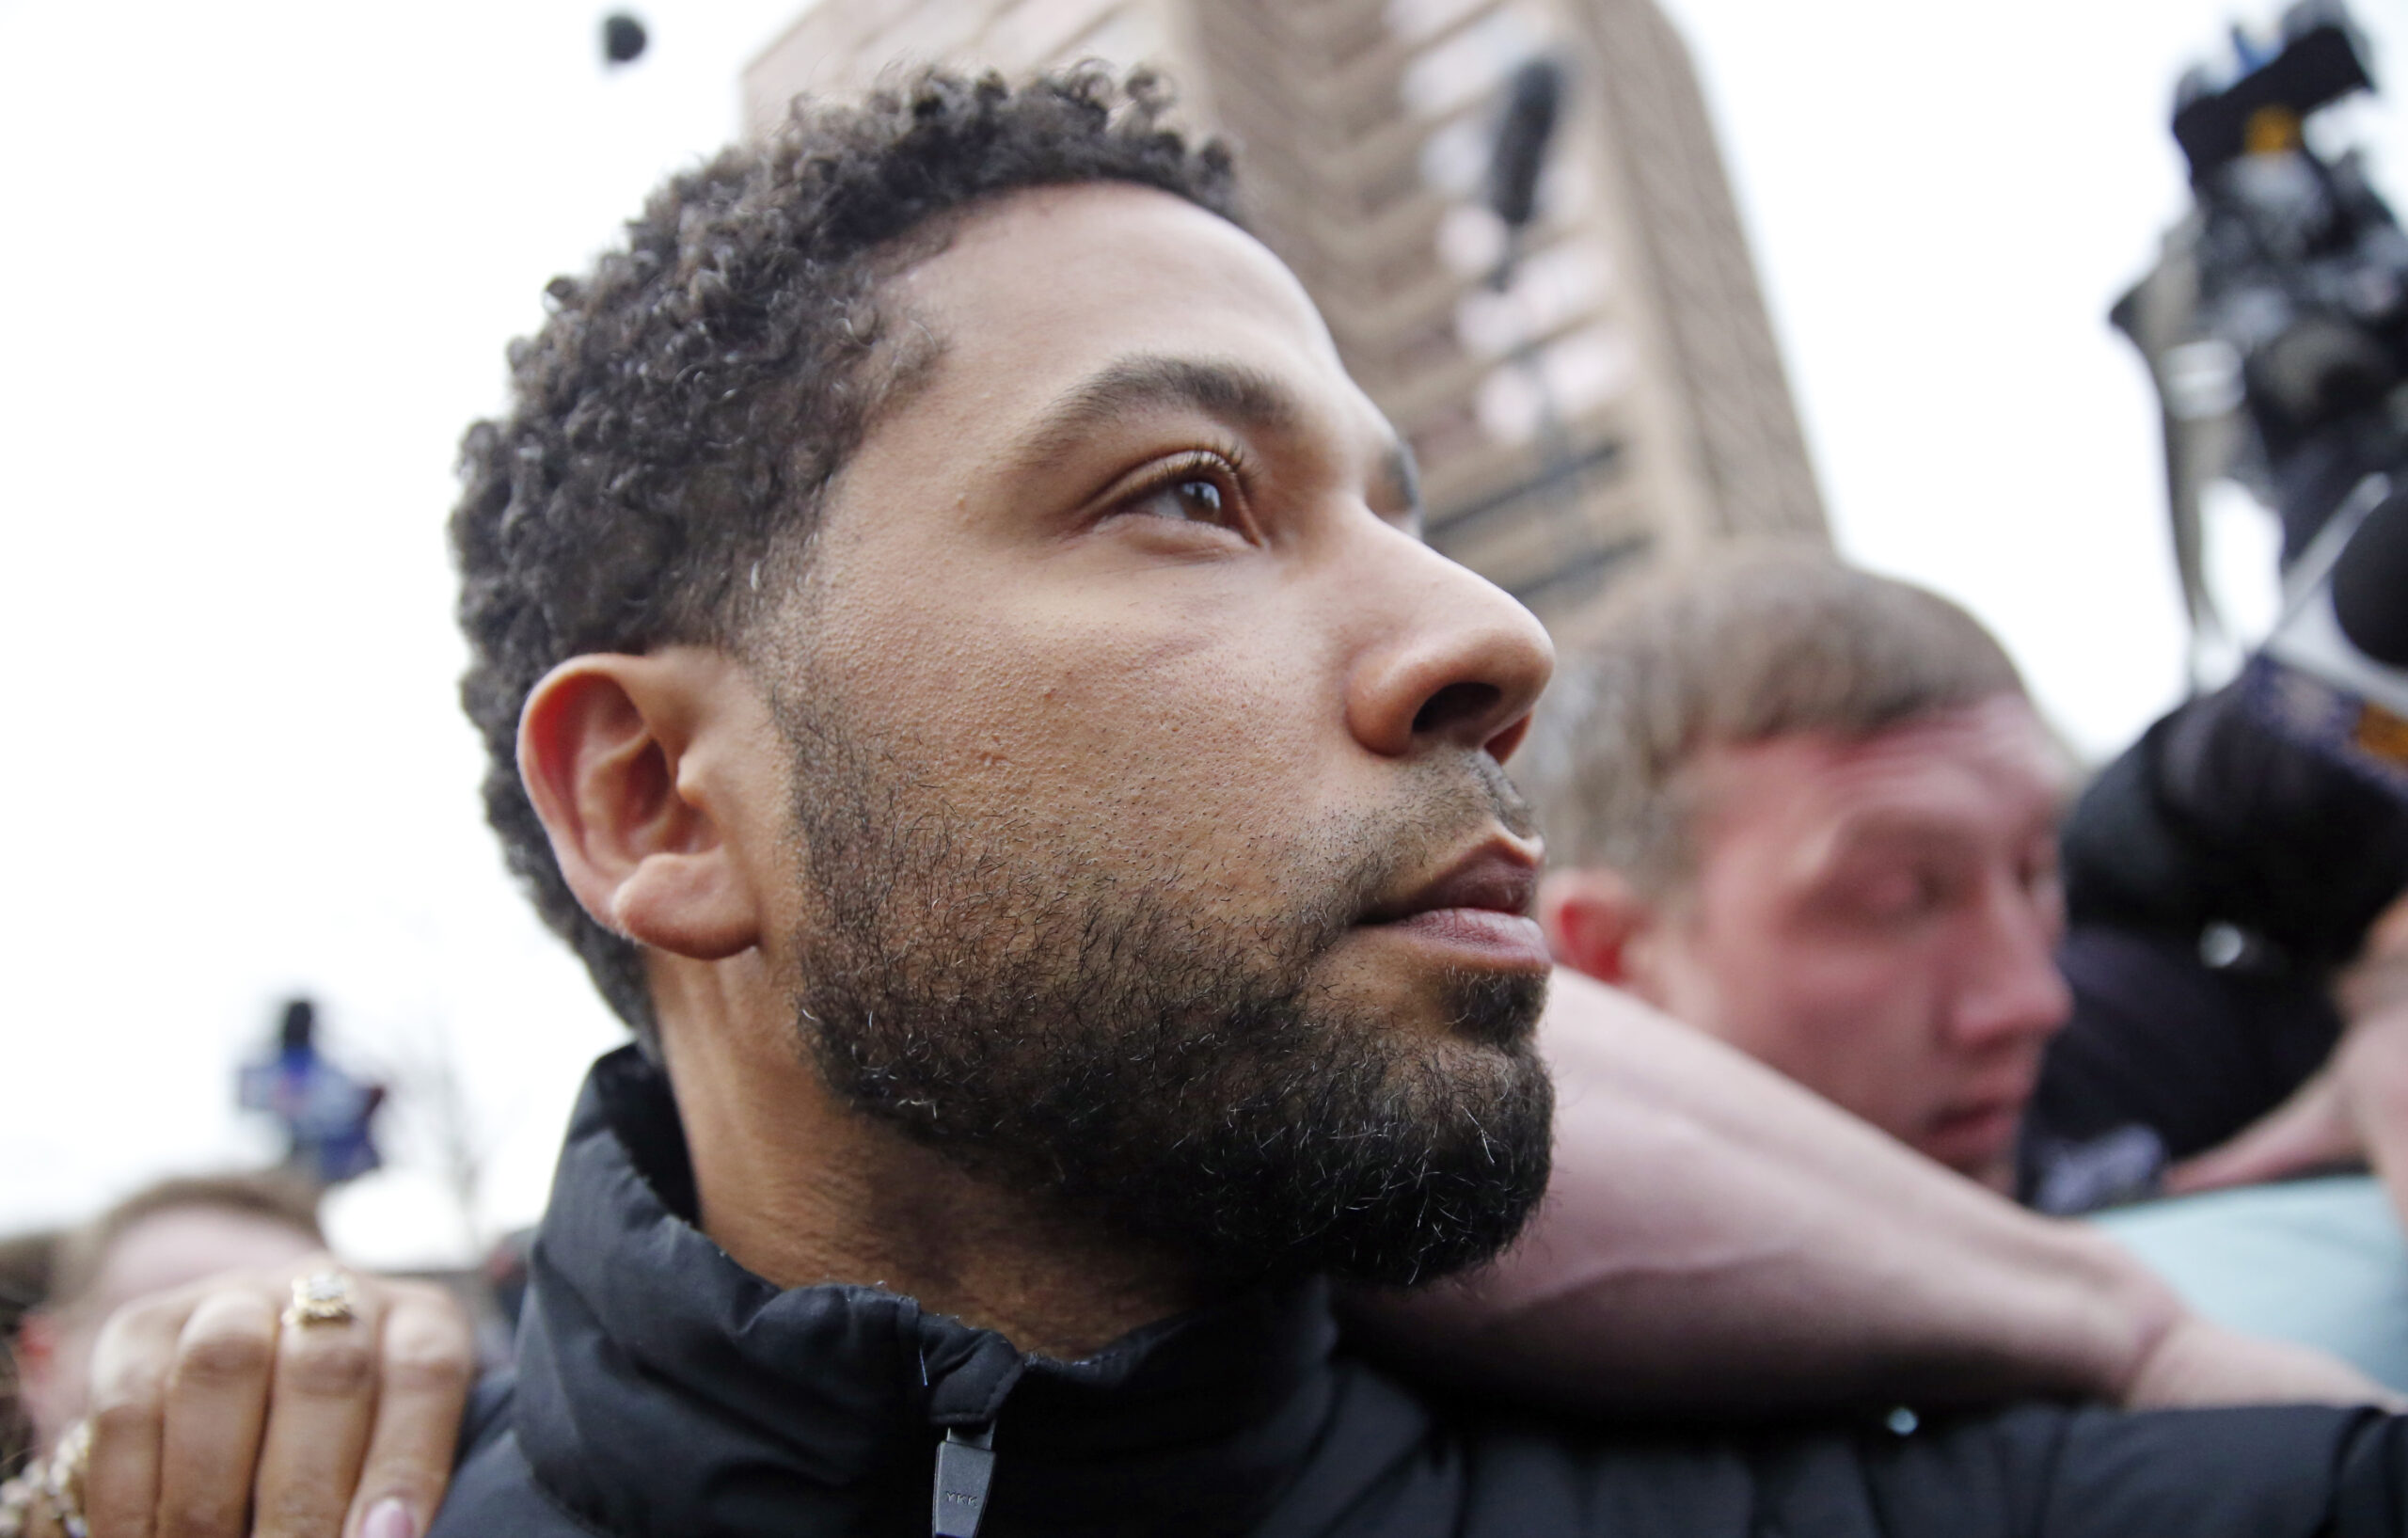 Jussie Smollett Scheduled For Sentencing Thursday After Staging Hate Crime